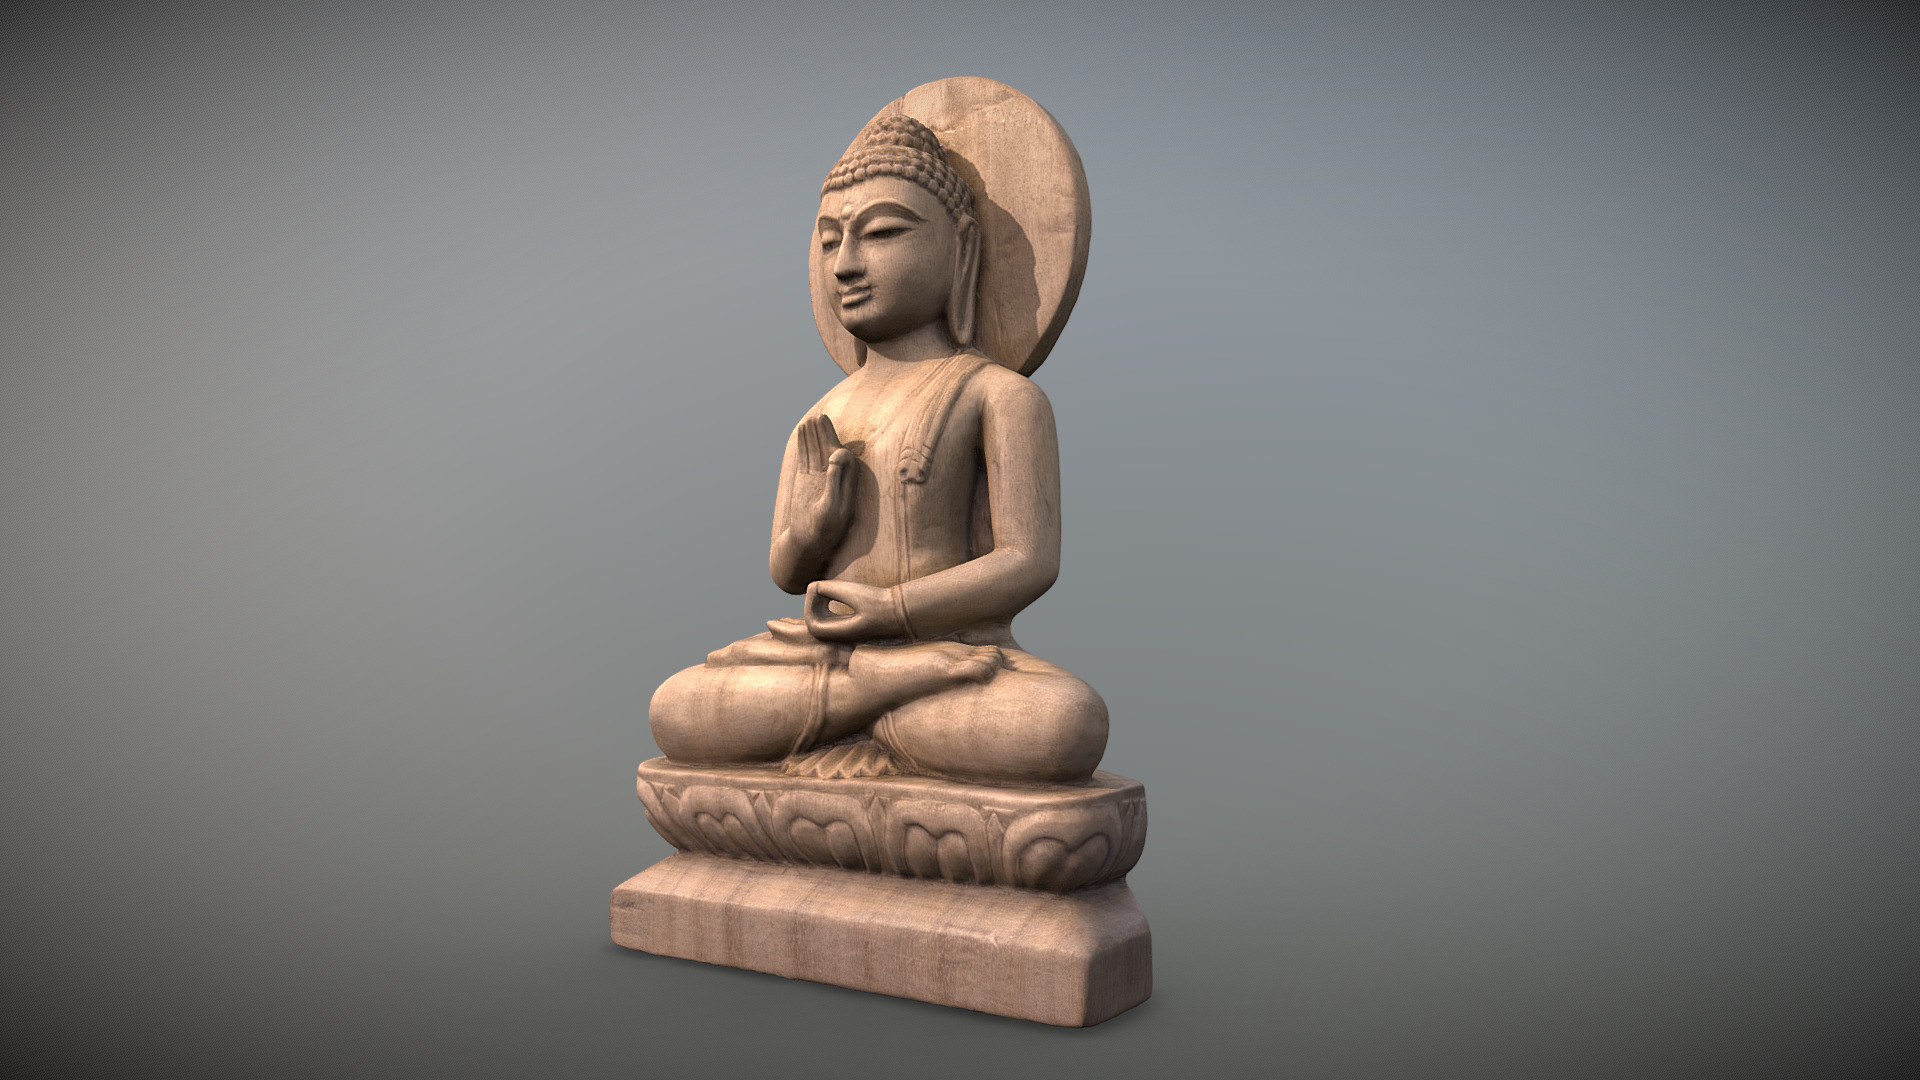 3D model Buddha statuette Low poly - This is a 3D model of the Buddha statuette Low poly. The 3D model is about a statue of a seated buddha.